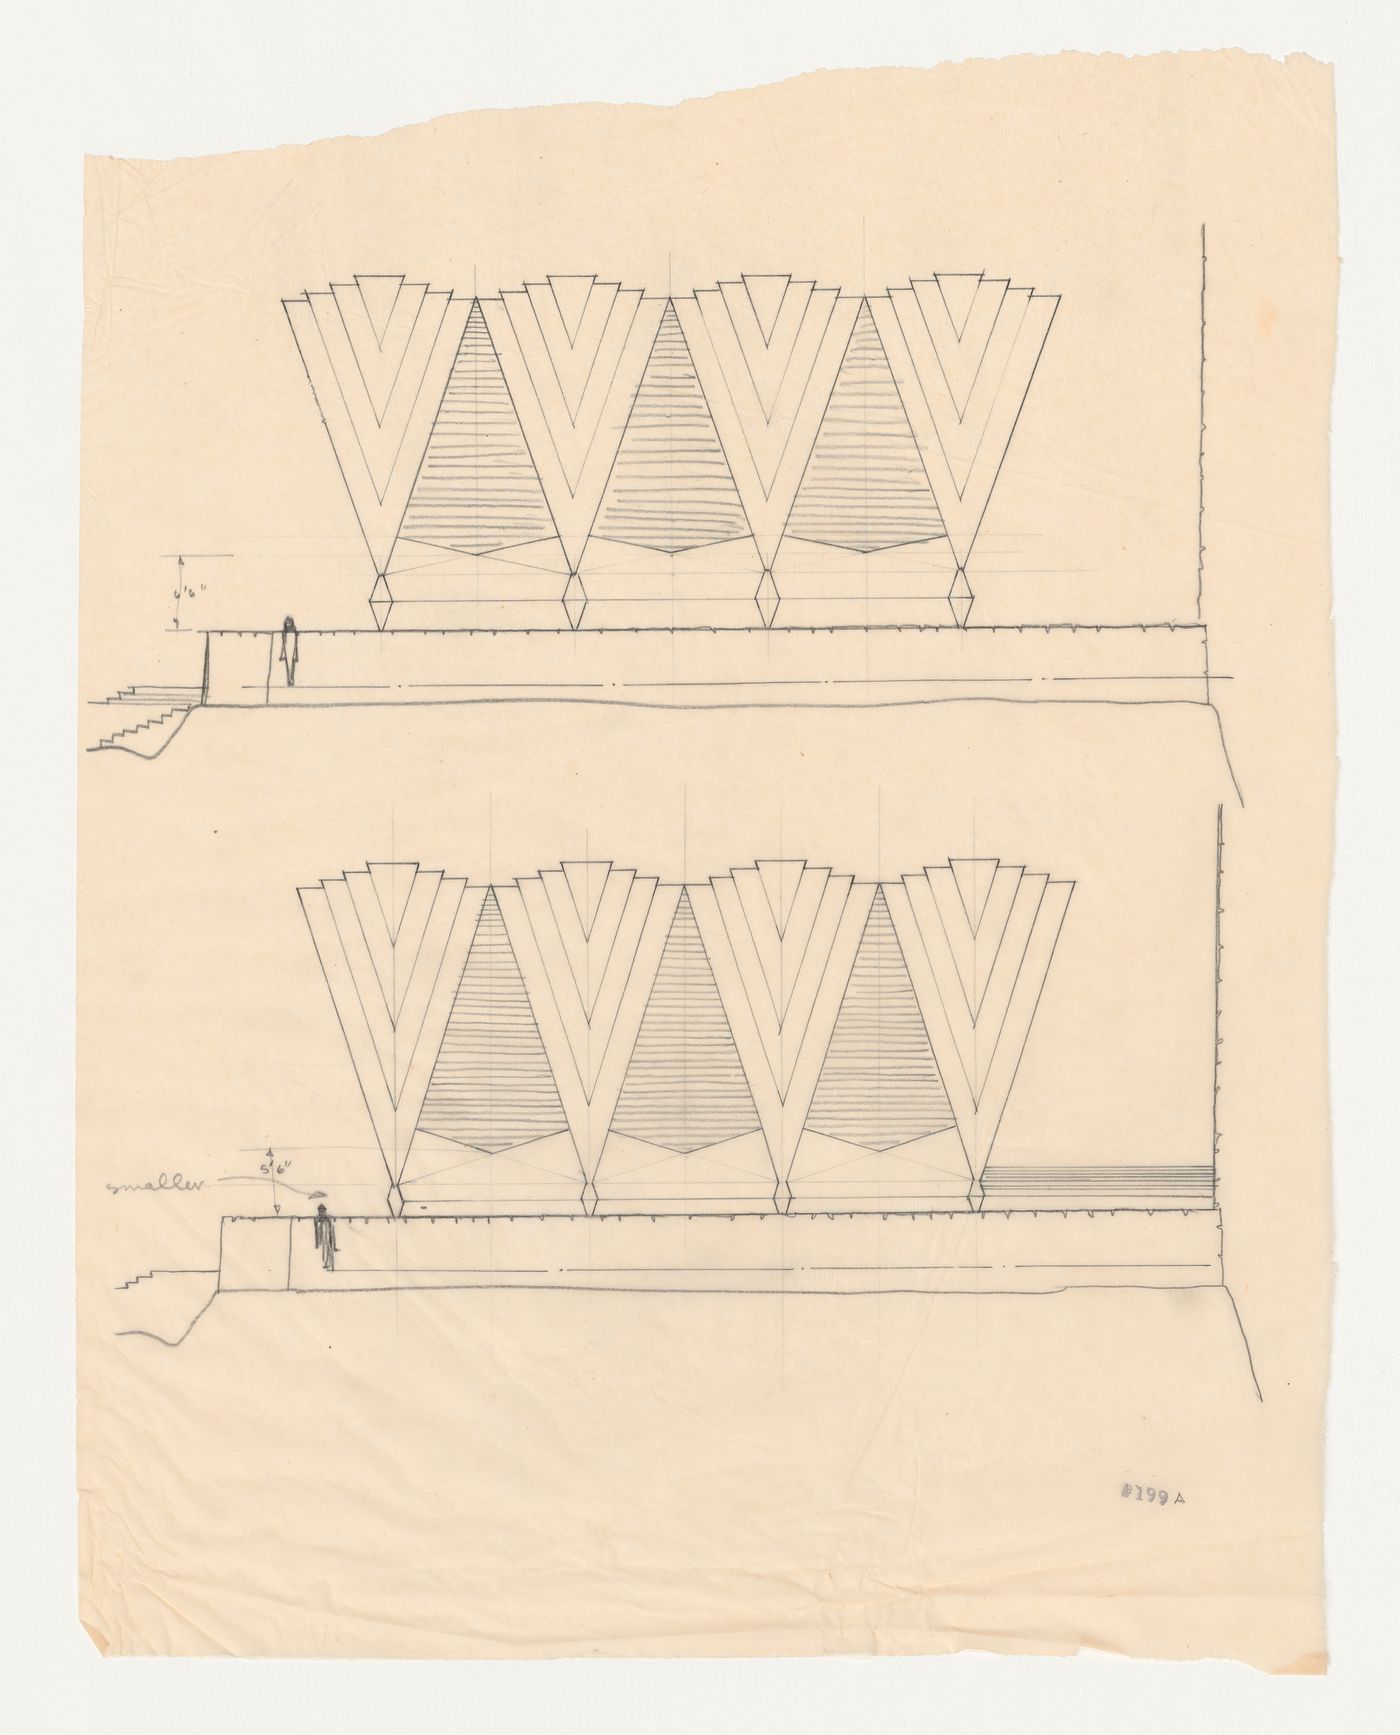 Two alternate elevations for a chapel roof canopy based on the Wayfarers' Chapel design